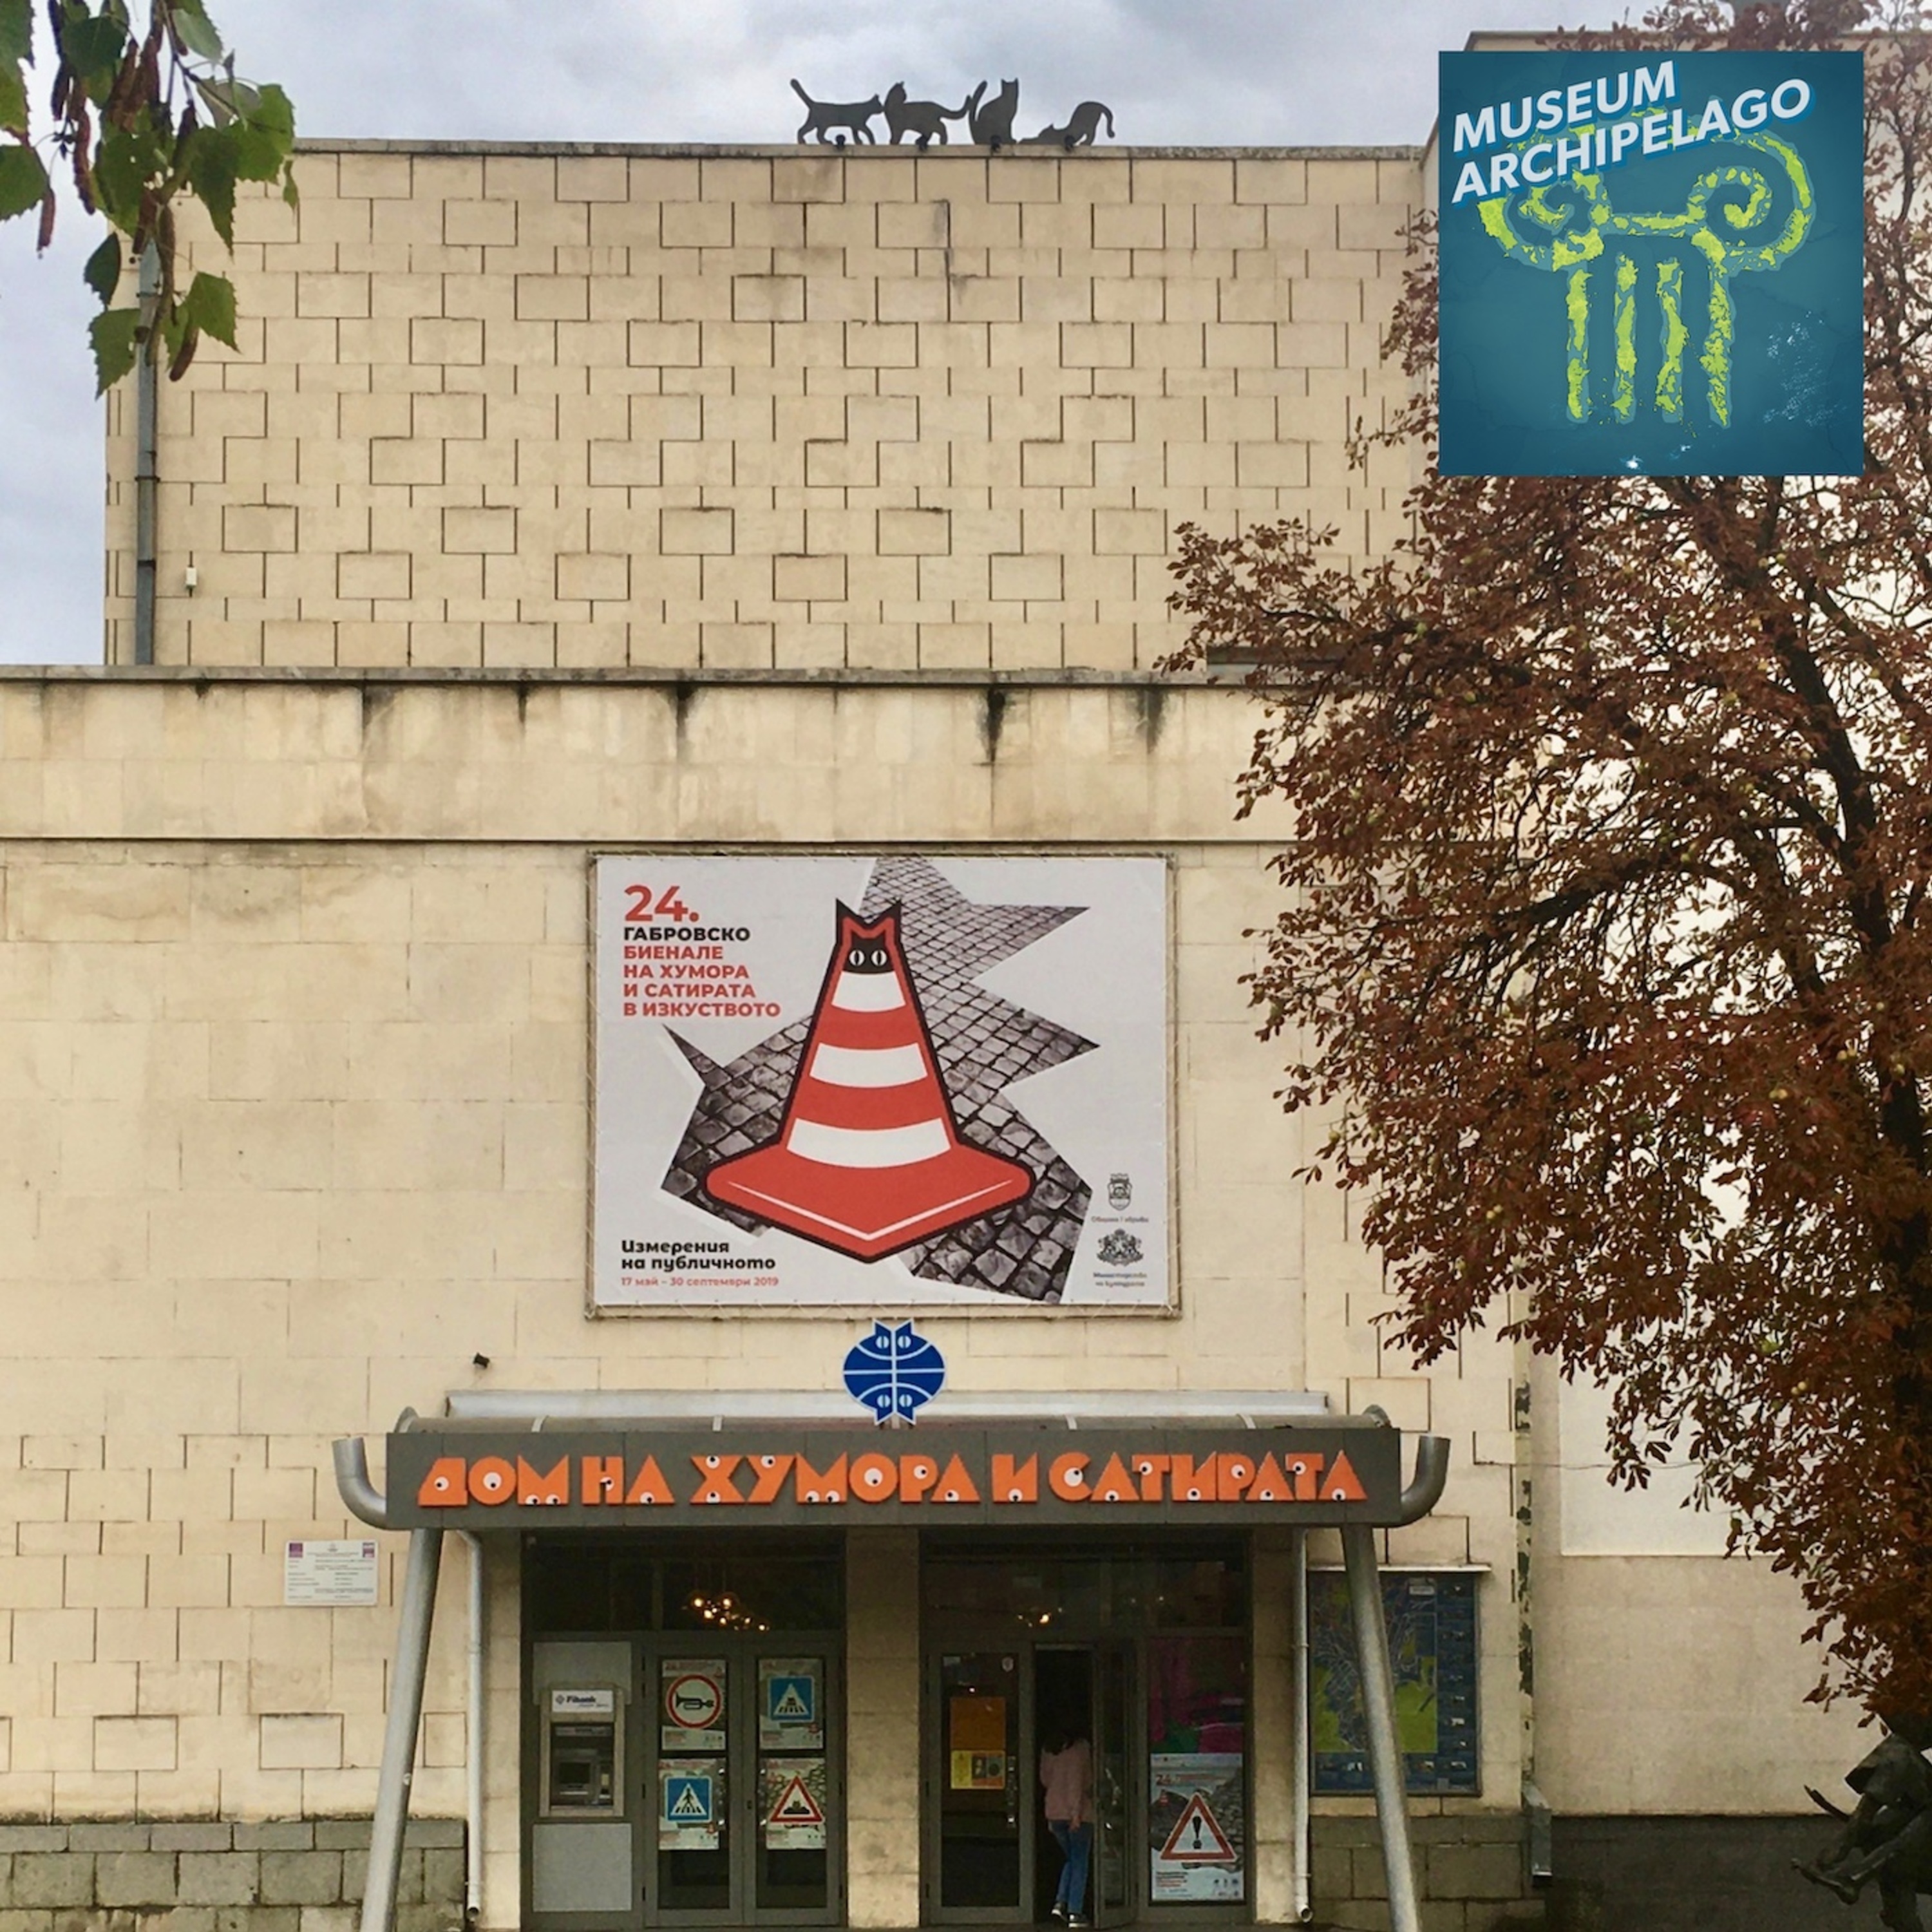 70. The Gabrovo Museum of Humor Bolsters Its Legacy of Political Satire Post-Communism